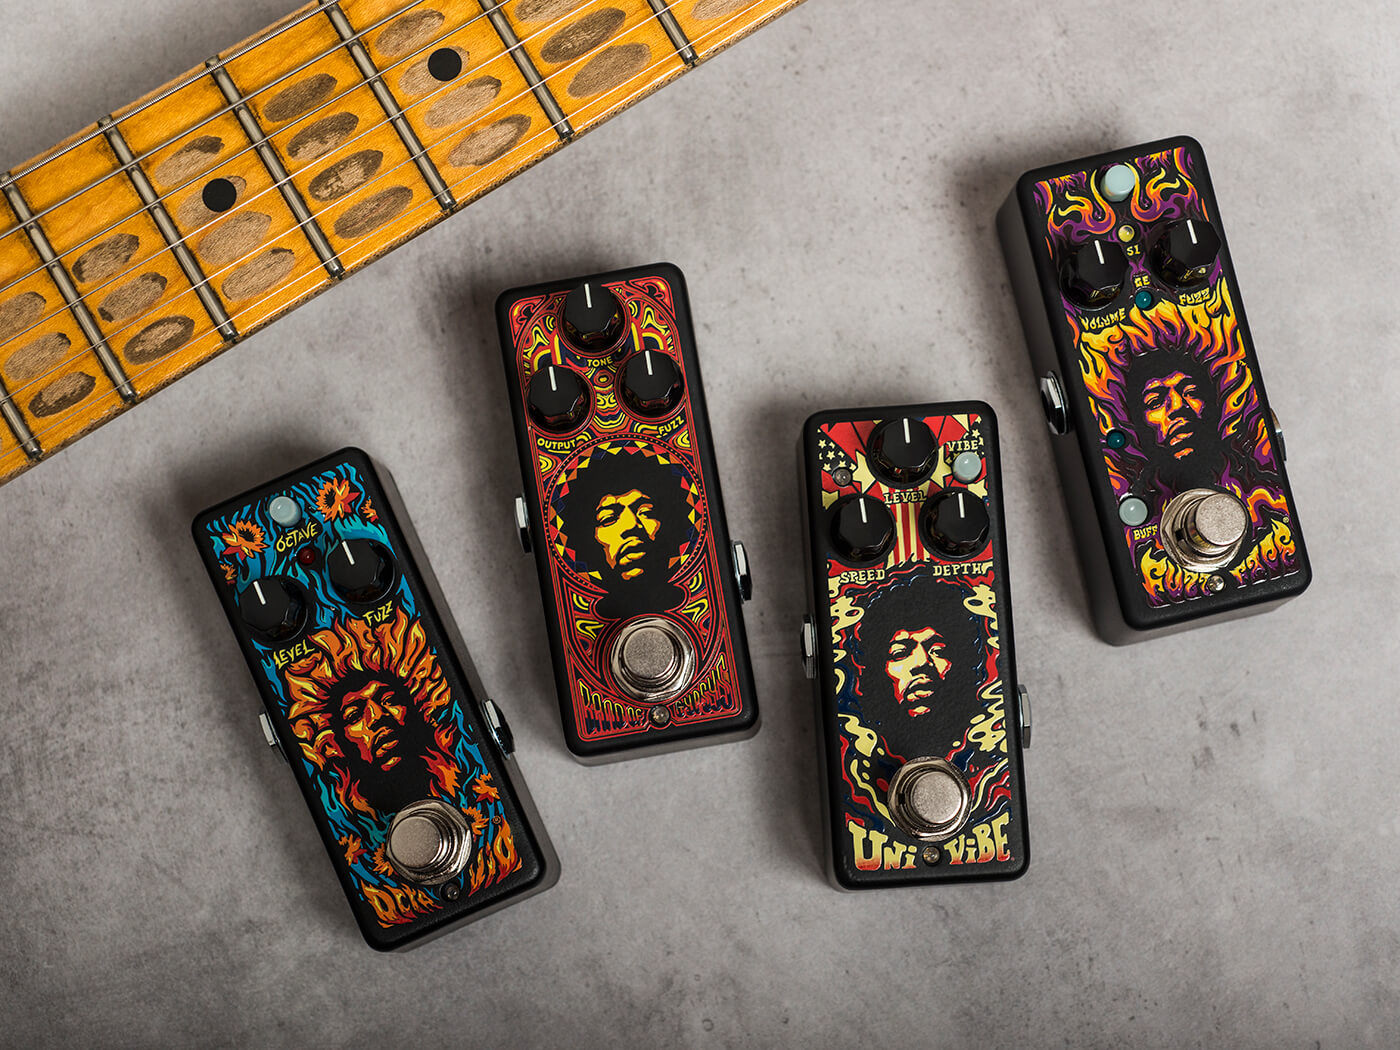 Review: Dunlop Authentic Hendrix '69 Psych Series Pedals